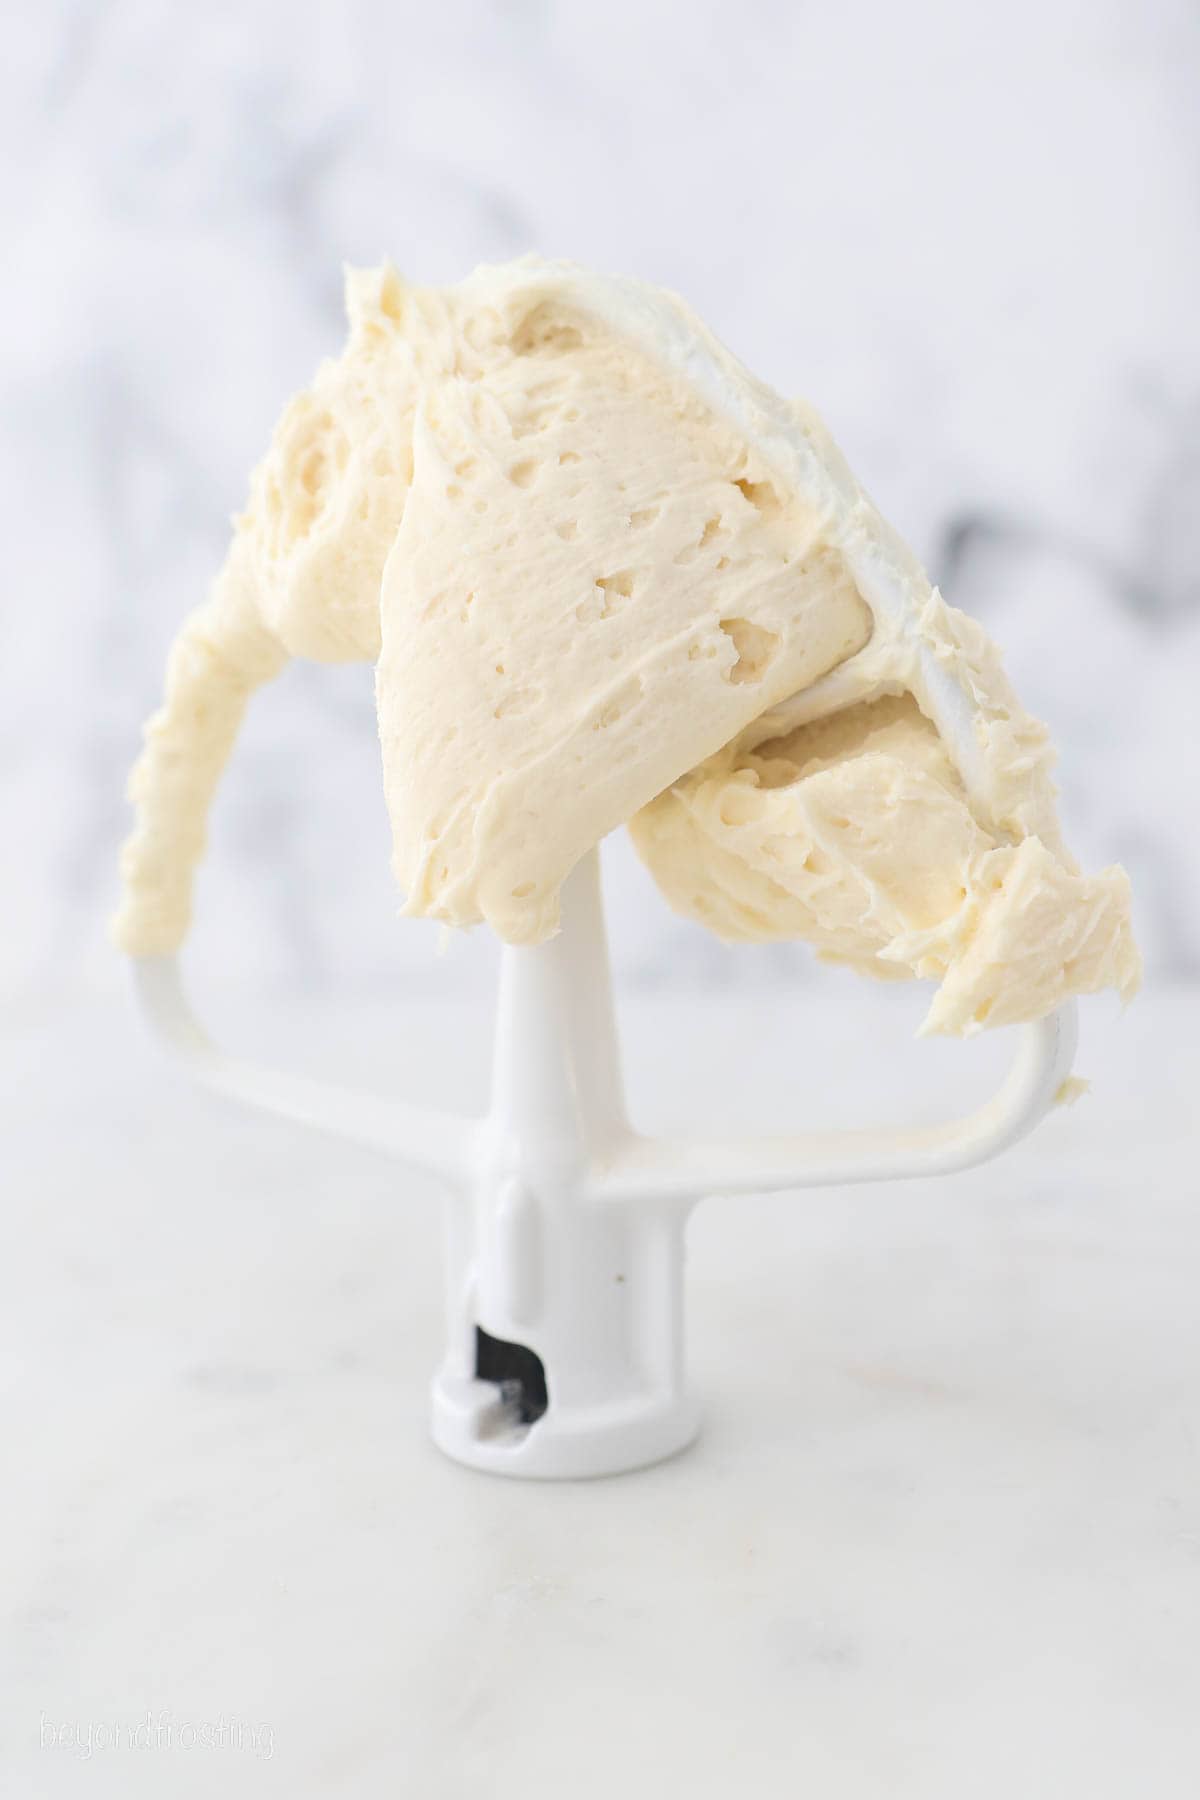 A stand mixer attachment covered with bourbon salted caramel frosting standing upright on a marble countertop.